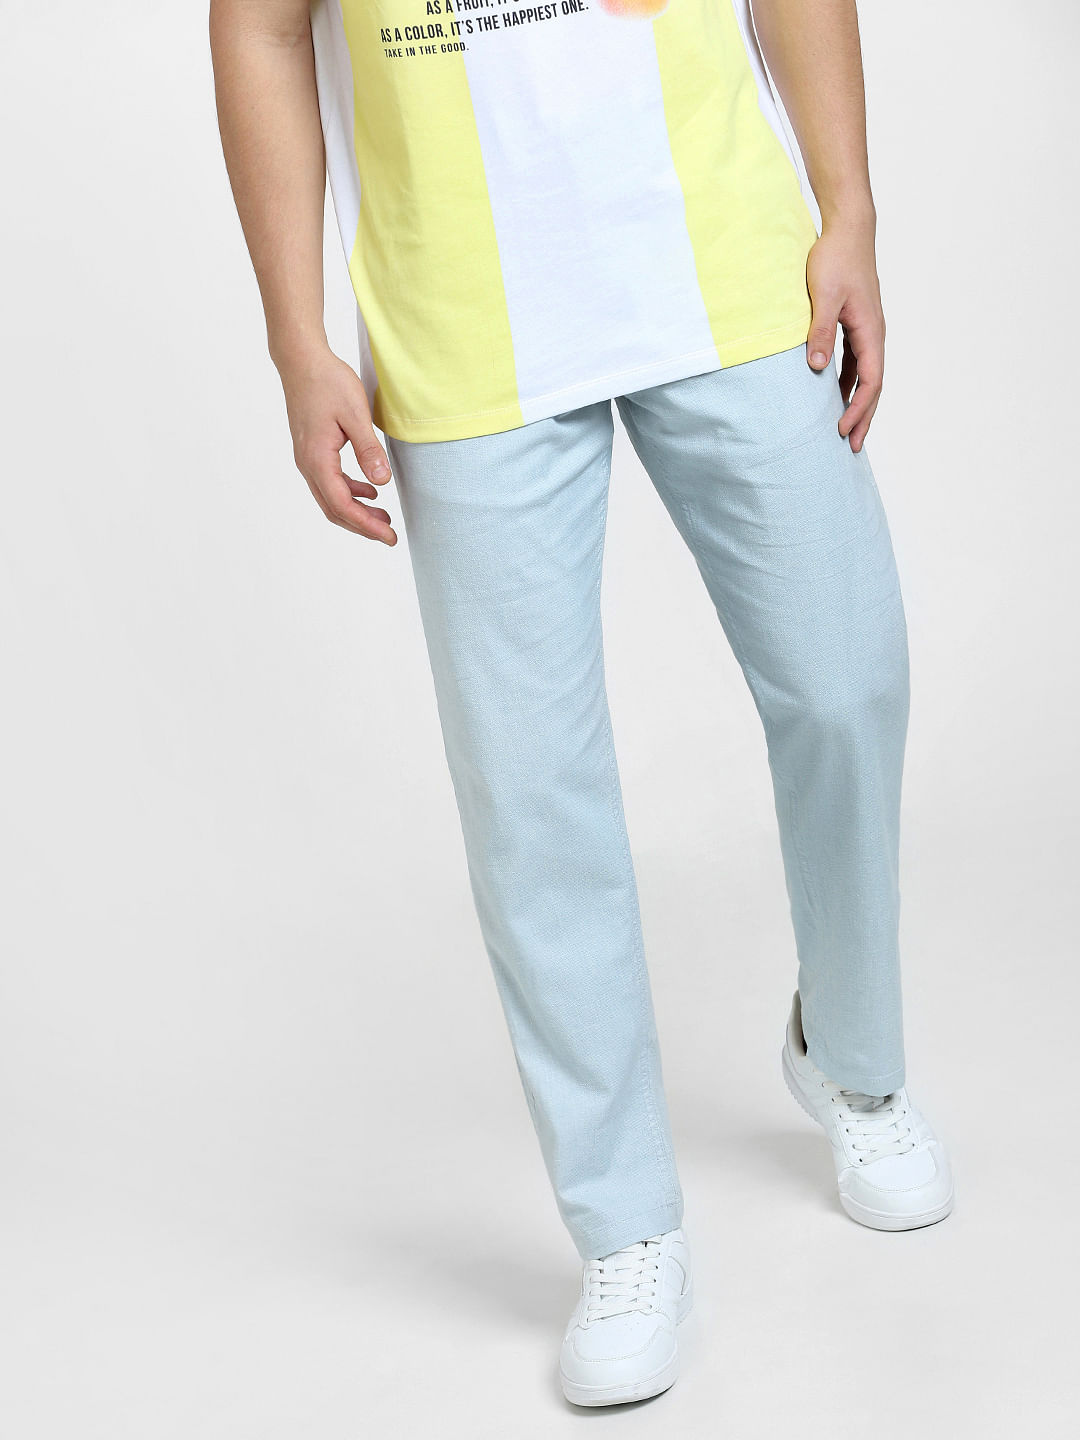 I Hate Wearing Shorts So Im Buying These Lightweight Linen Pants